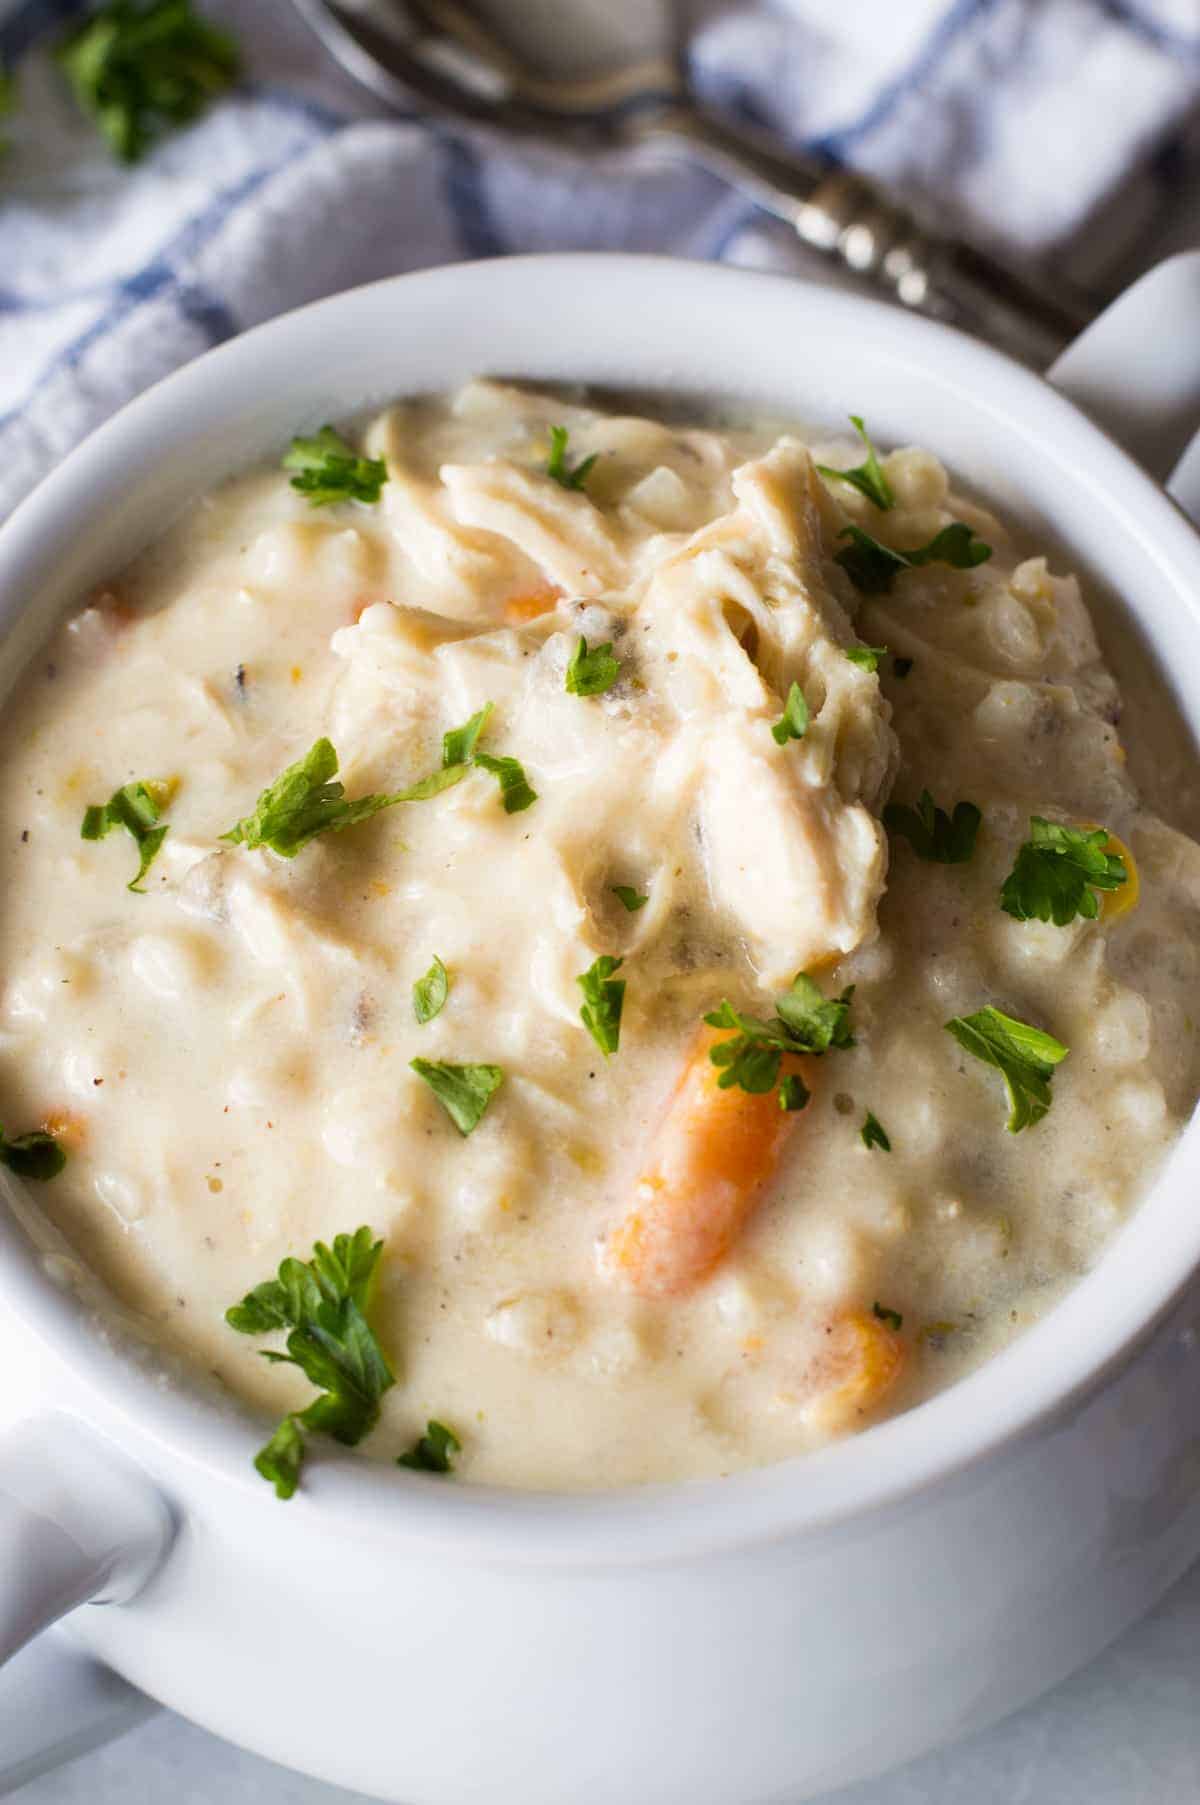 Slow Cooker Creamy Chicken and Wild Rice Soup! This soup is ultra creamy, ultra flavorful, and best part? There's no actual cream or butter used! This is the perfect lighter version of a classic comfort food. 